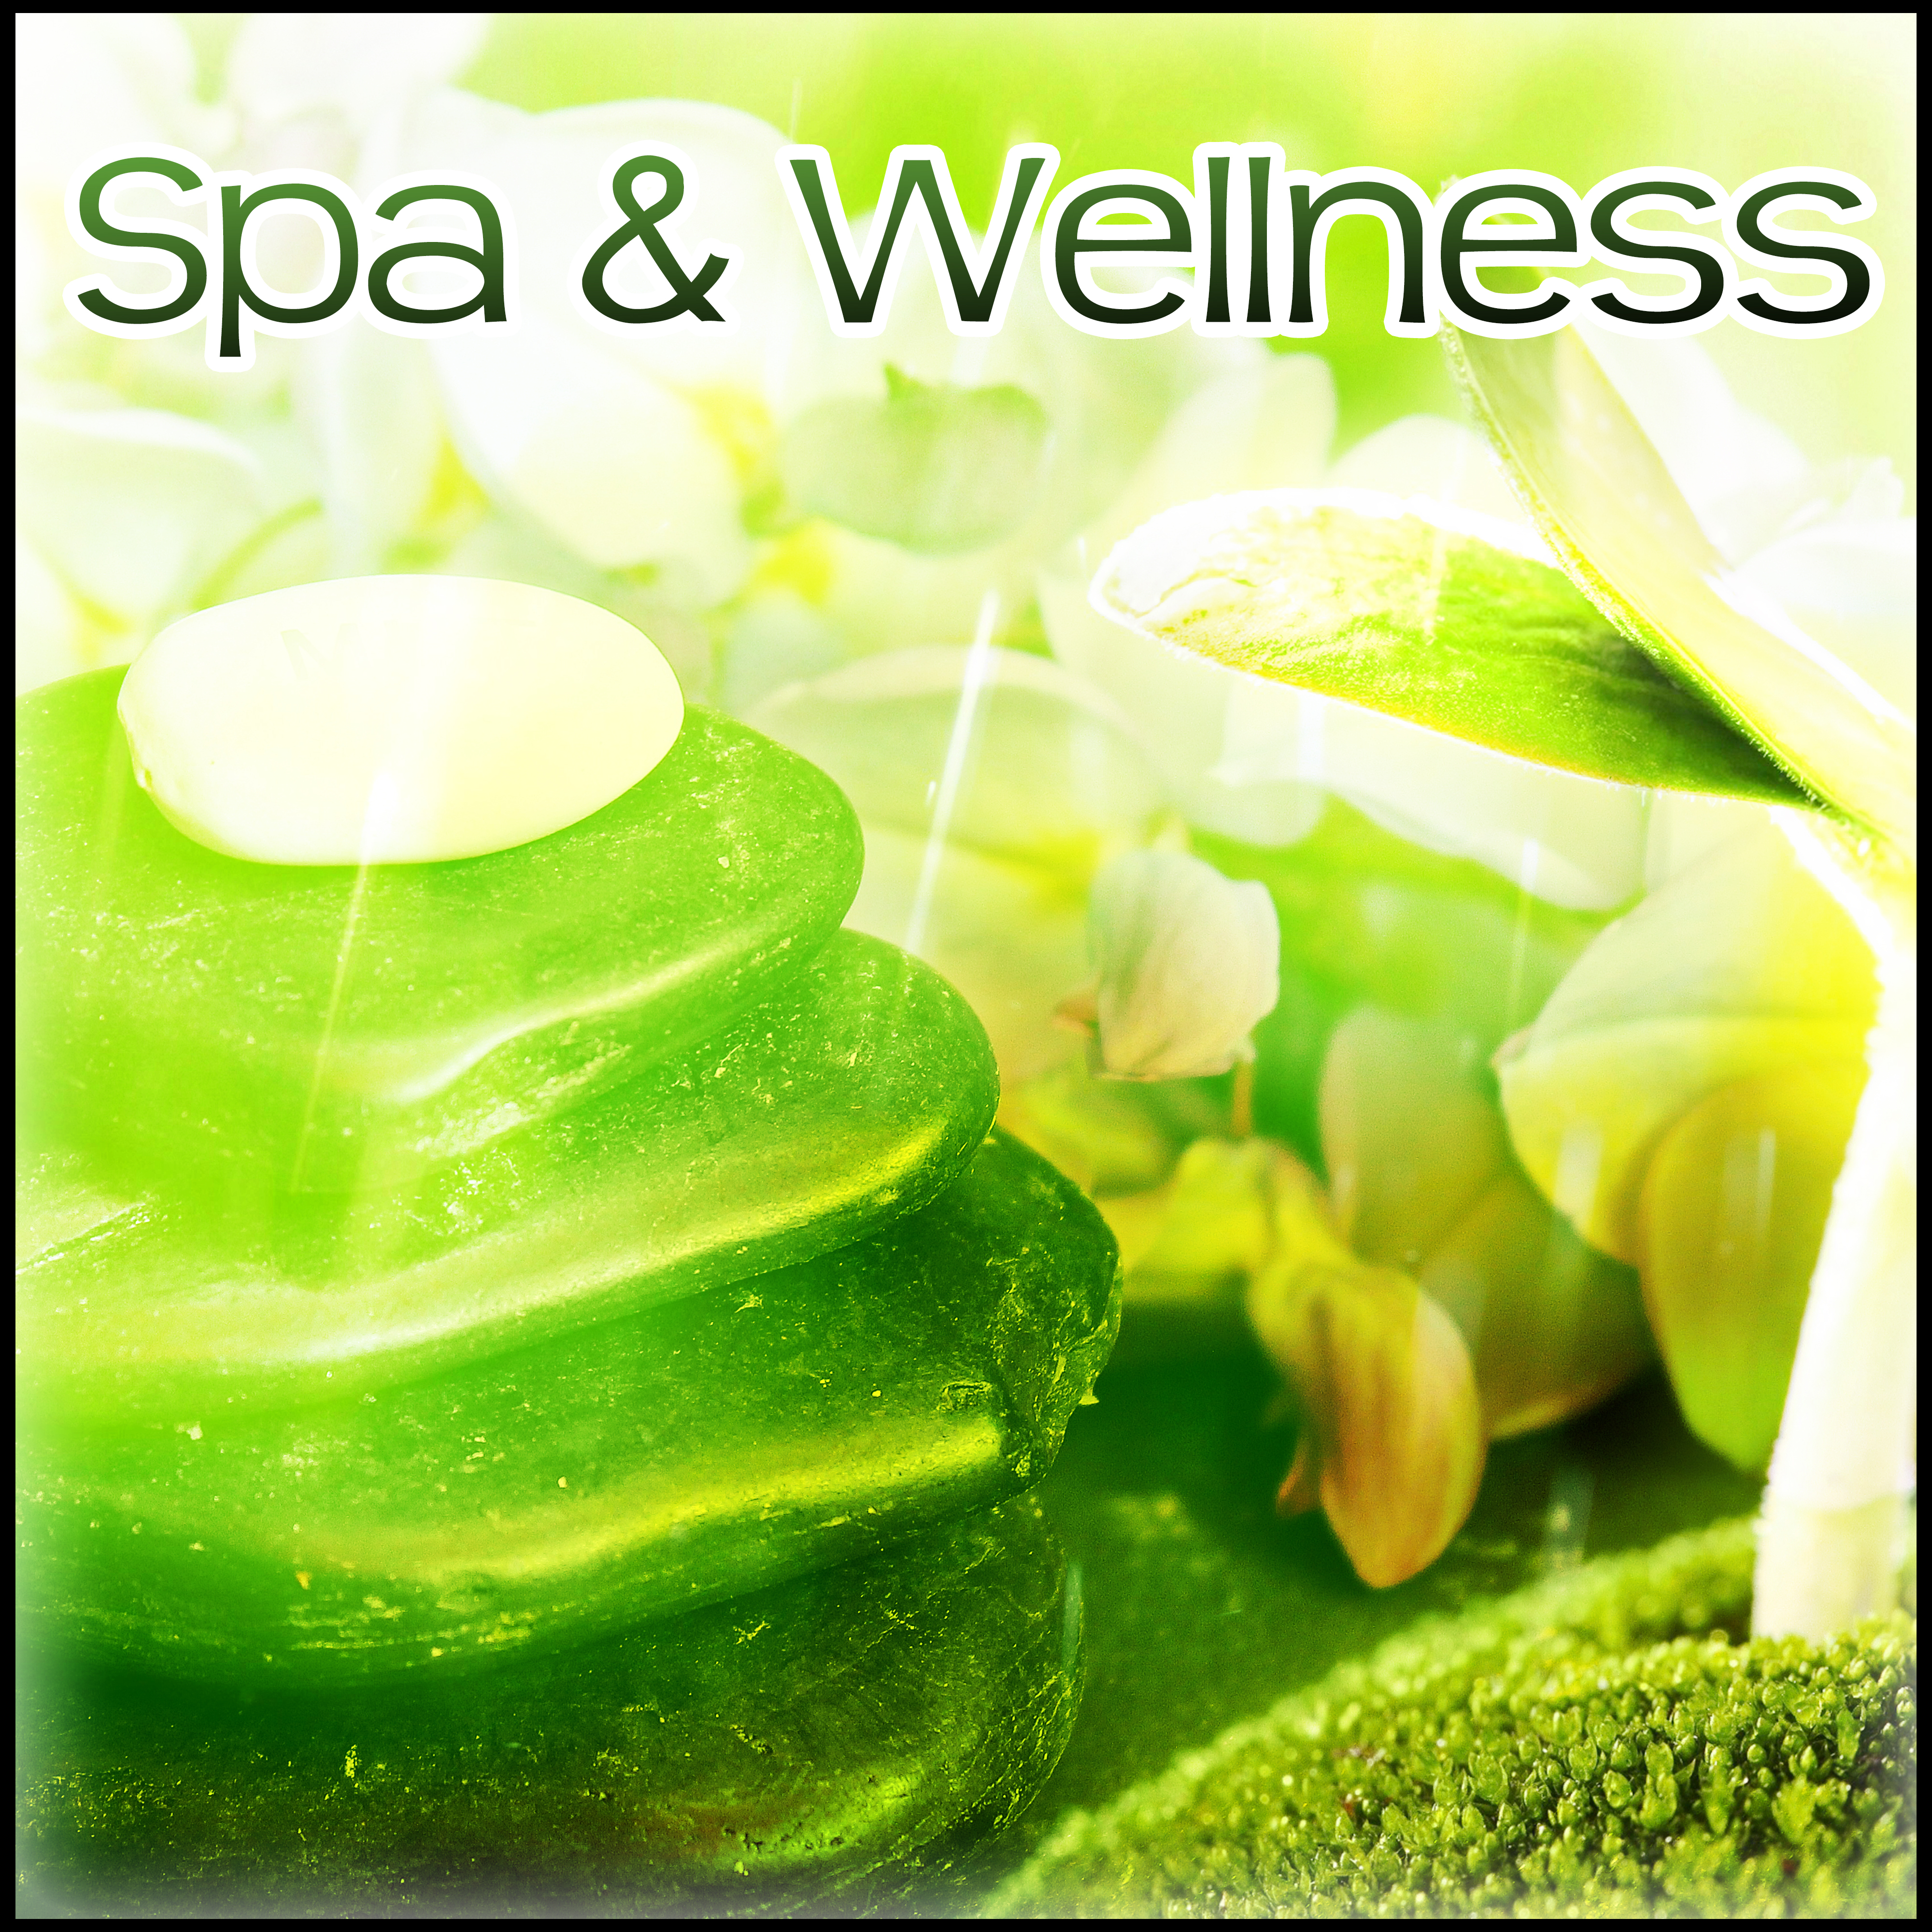 Spa  Wellness  Most Calmness Nature Sounds for Deep Relax while Spa  Beauty,  Calm Down Emotions and Enjoy Your Life, New Age Music